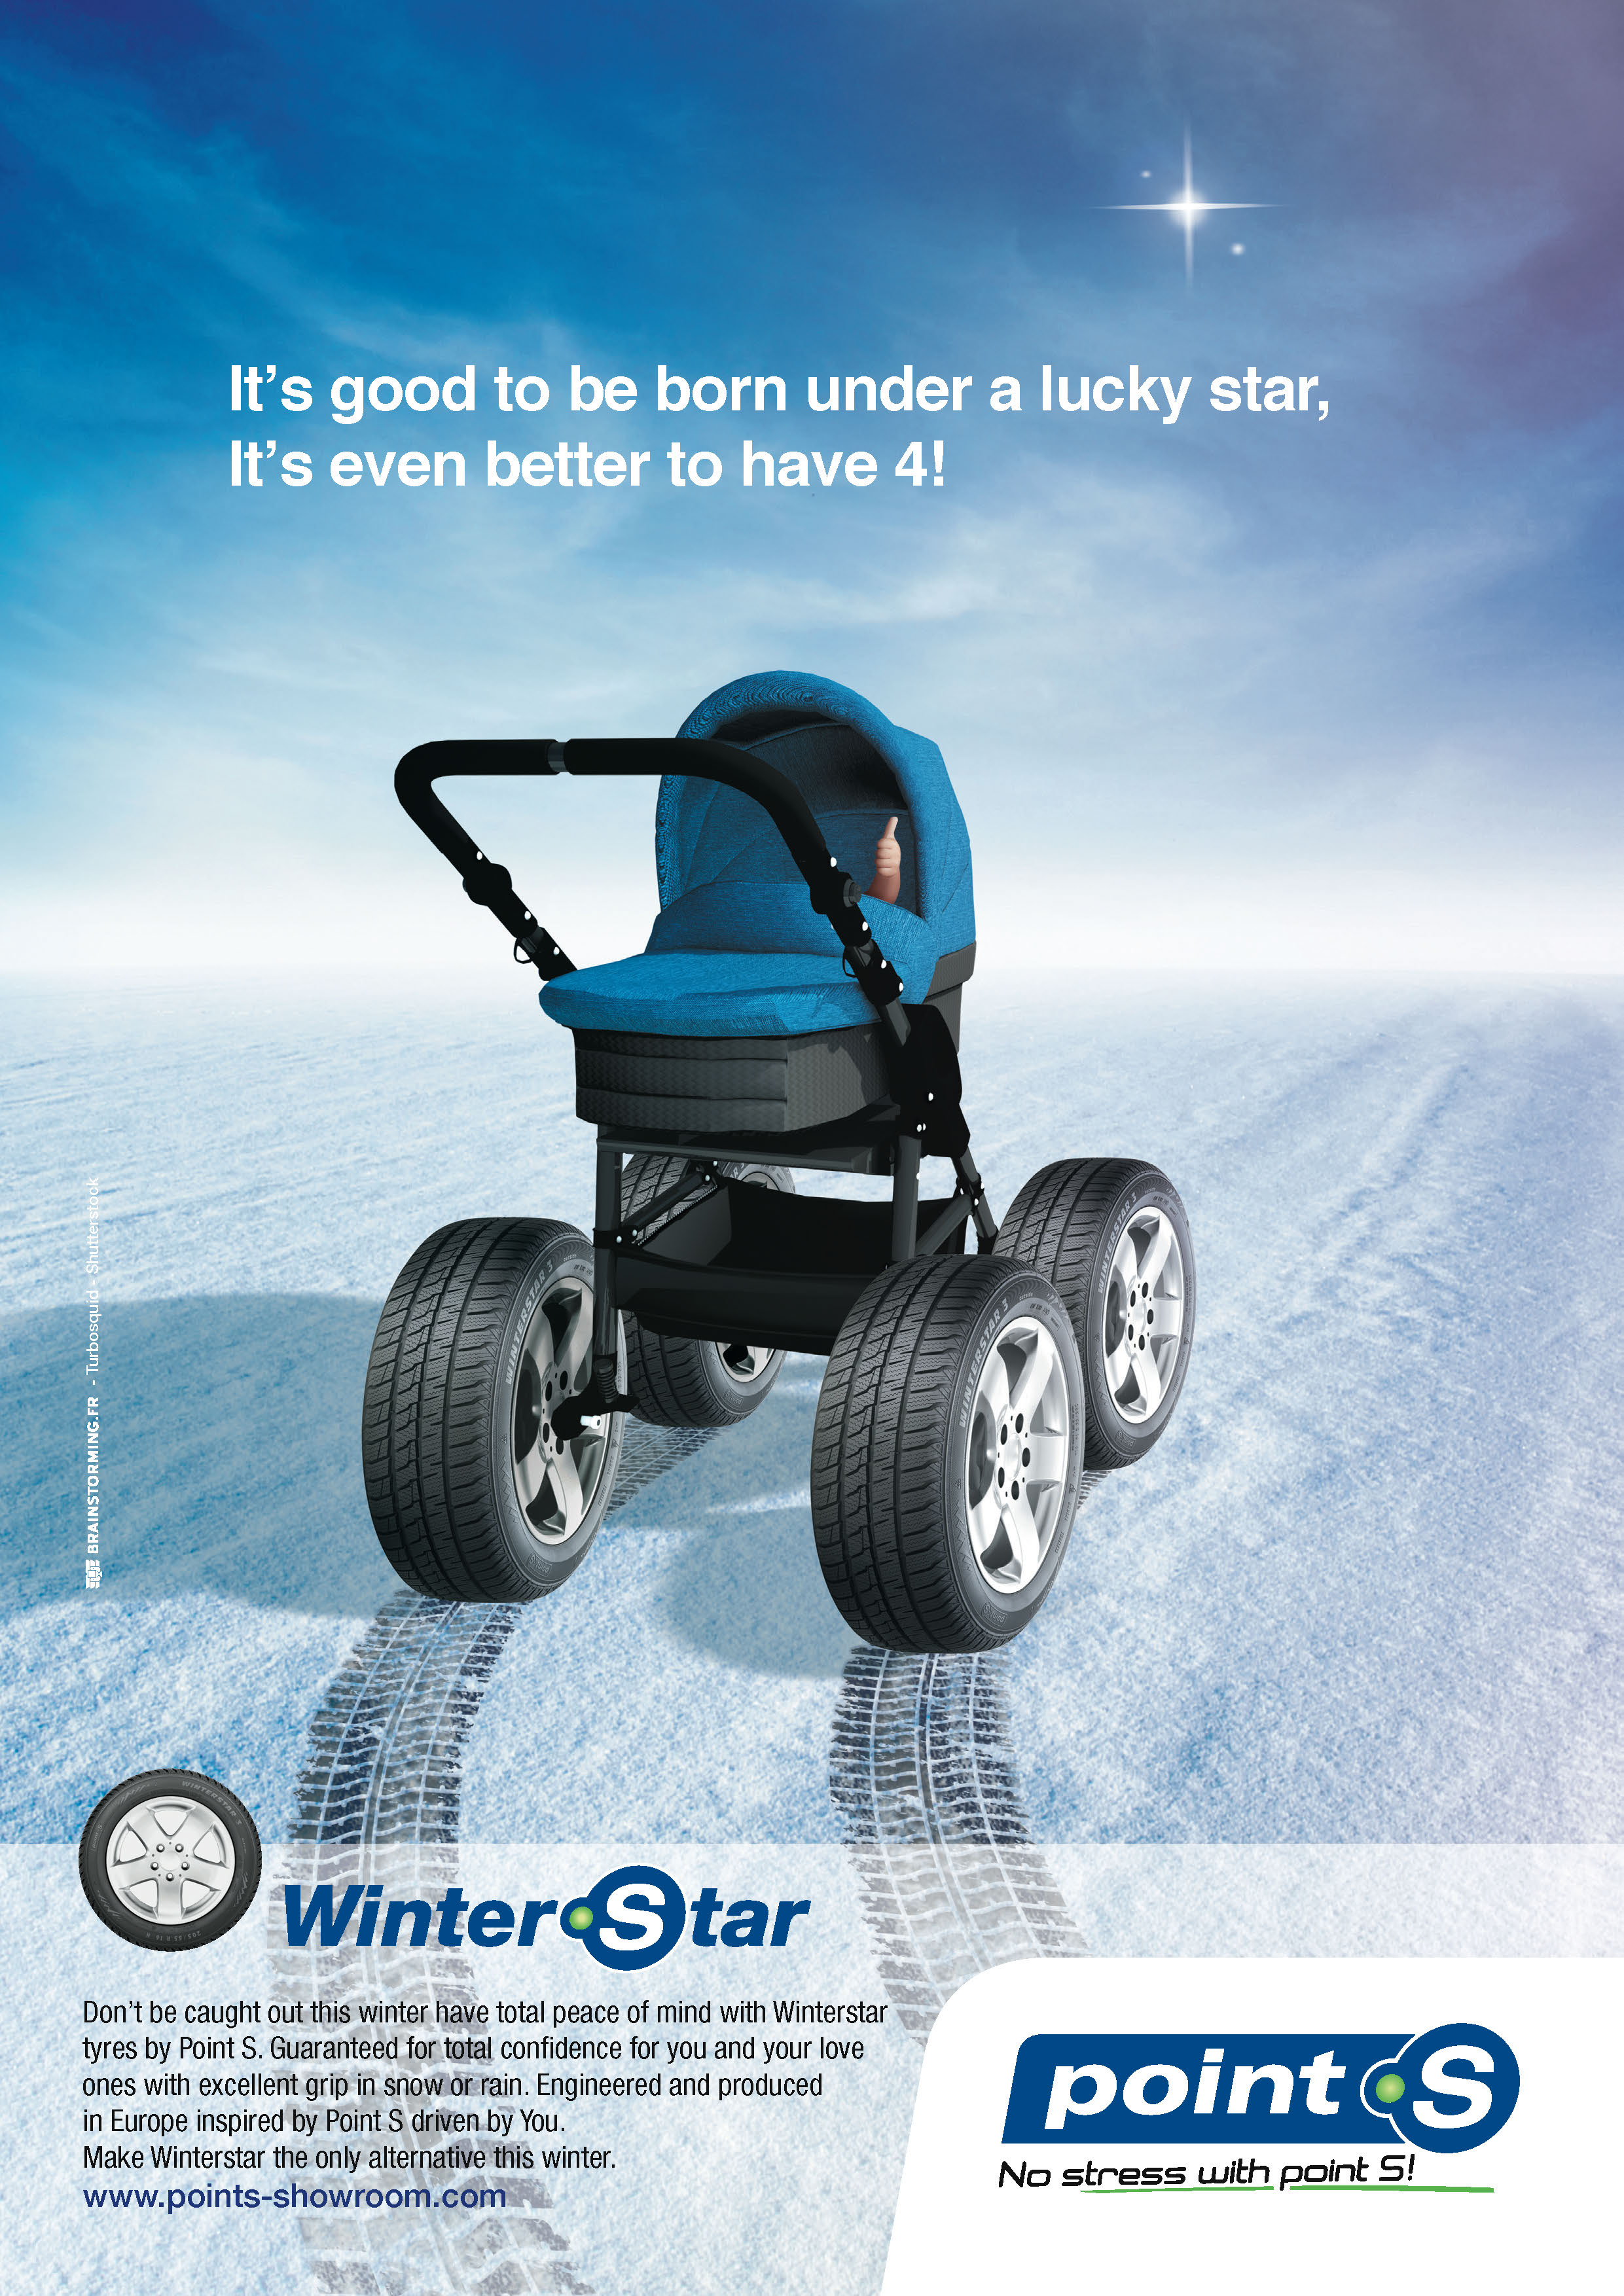 Point S launches new Winterstar campaign